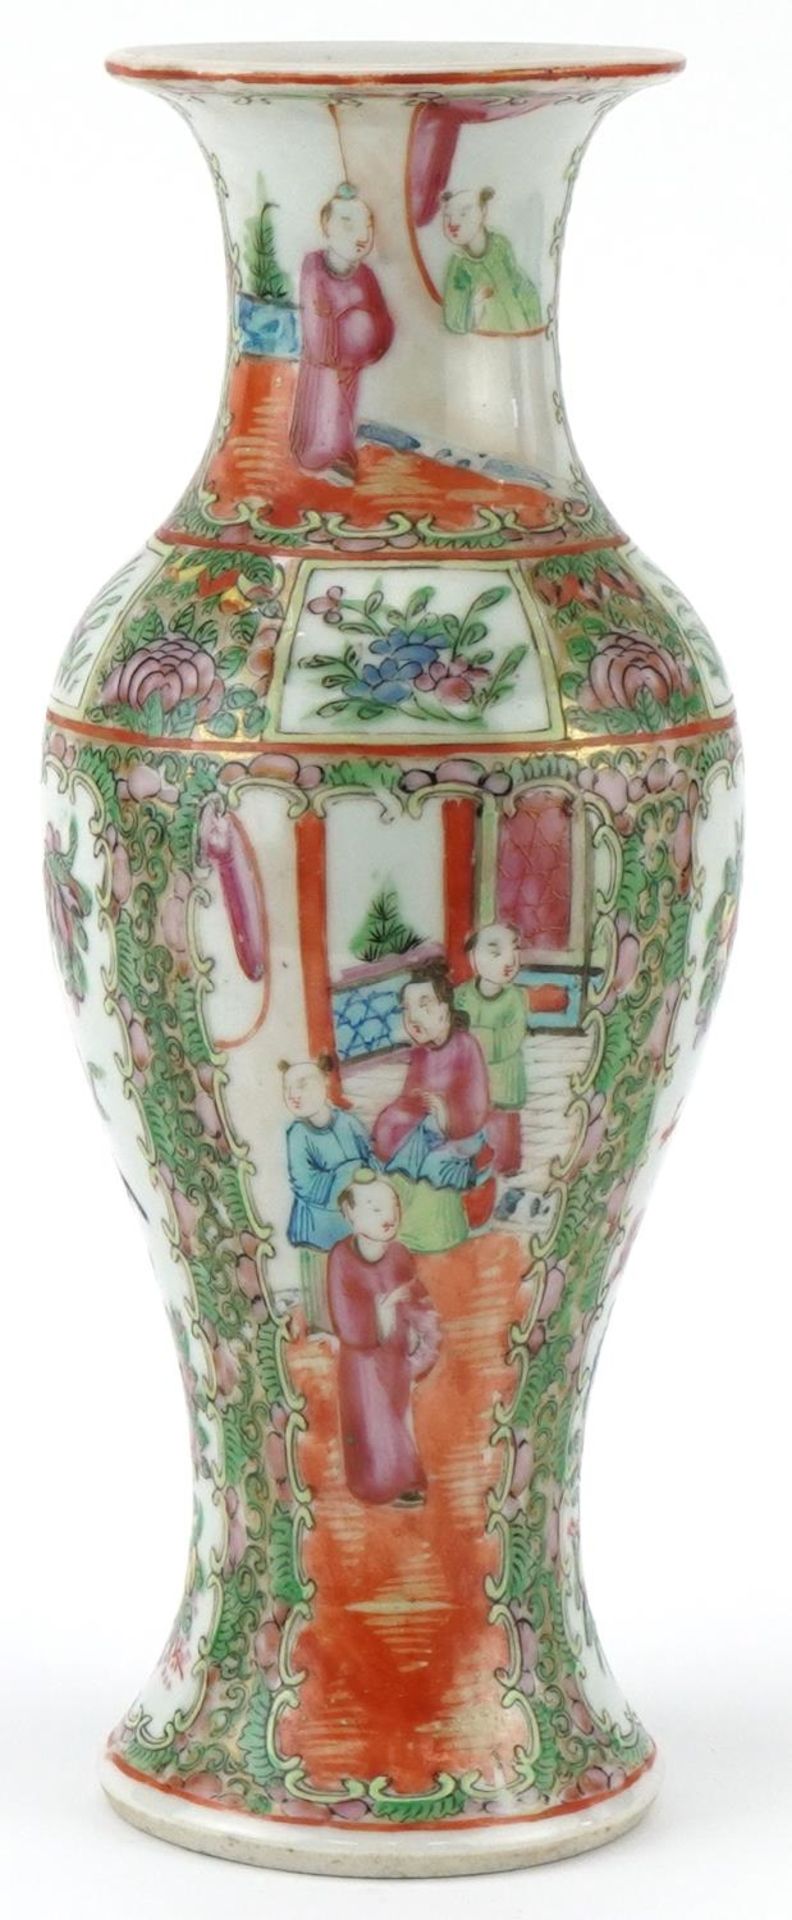 Chinese porcelain vase hand painted in the famille rose palette with flowers, birds and scenes, 25cm